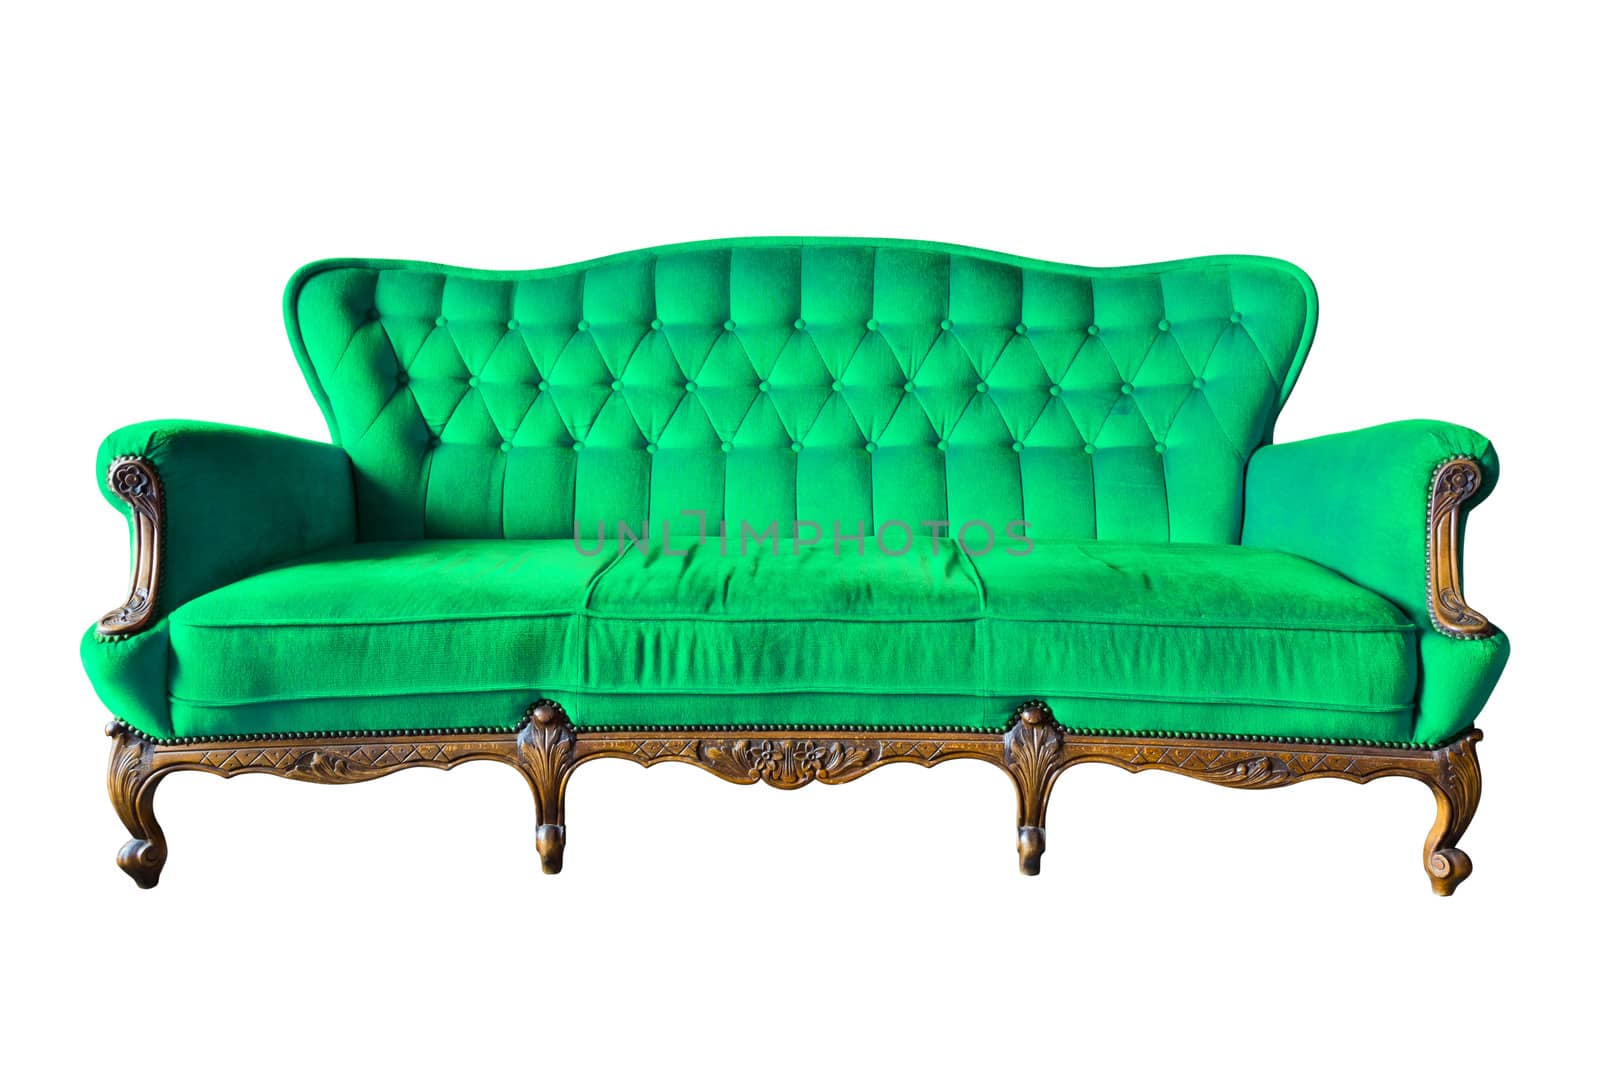 vintage green luxury armchair isolated with clipping path by tungphoto